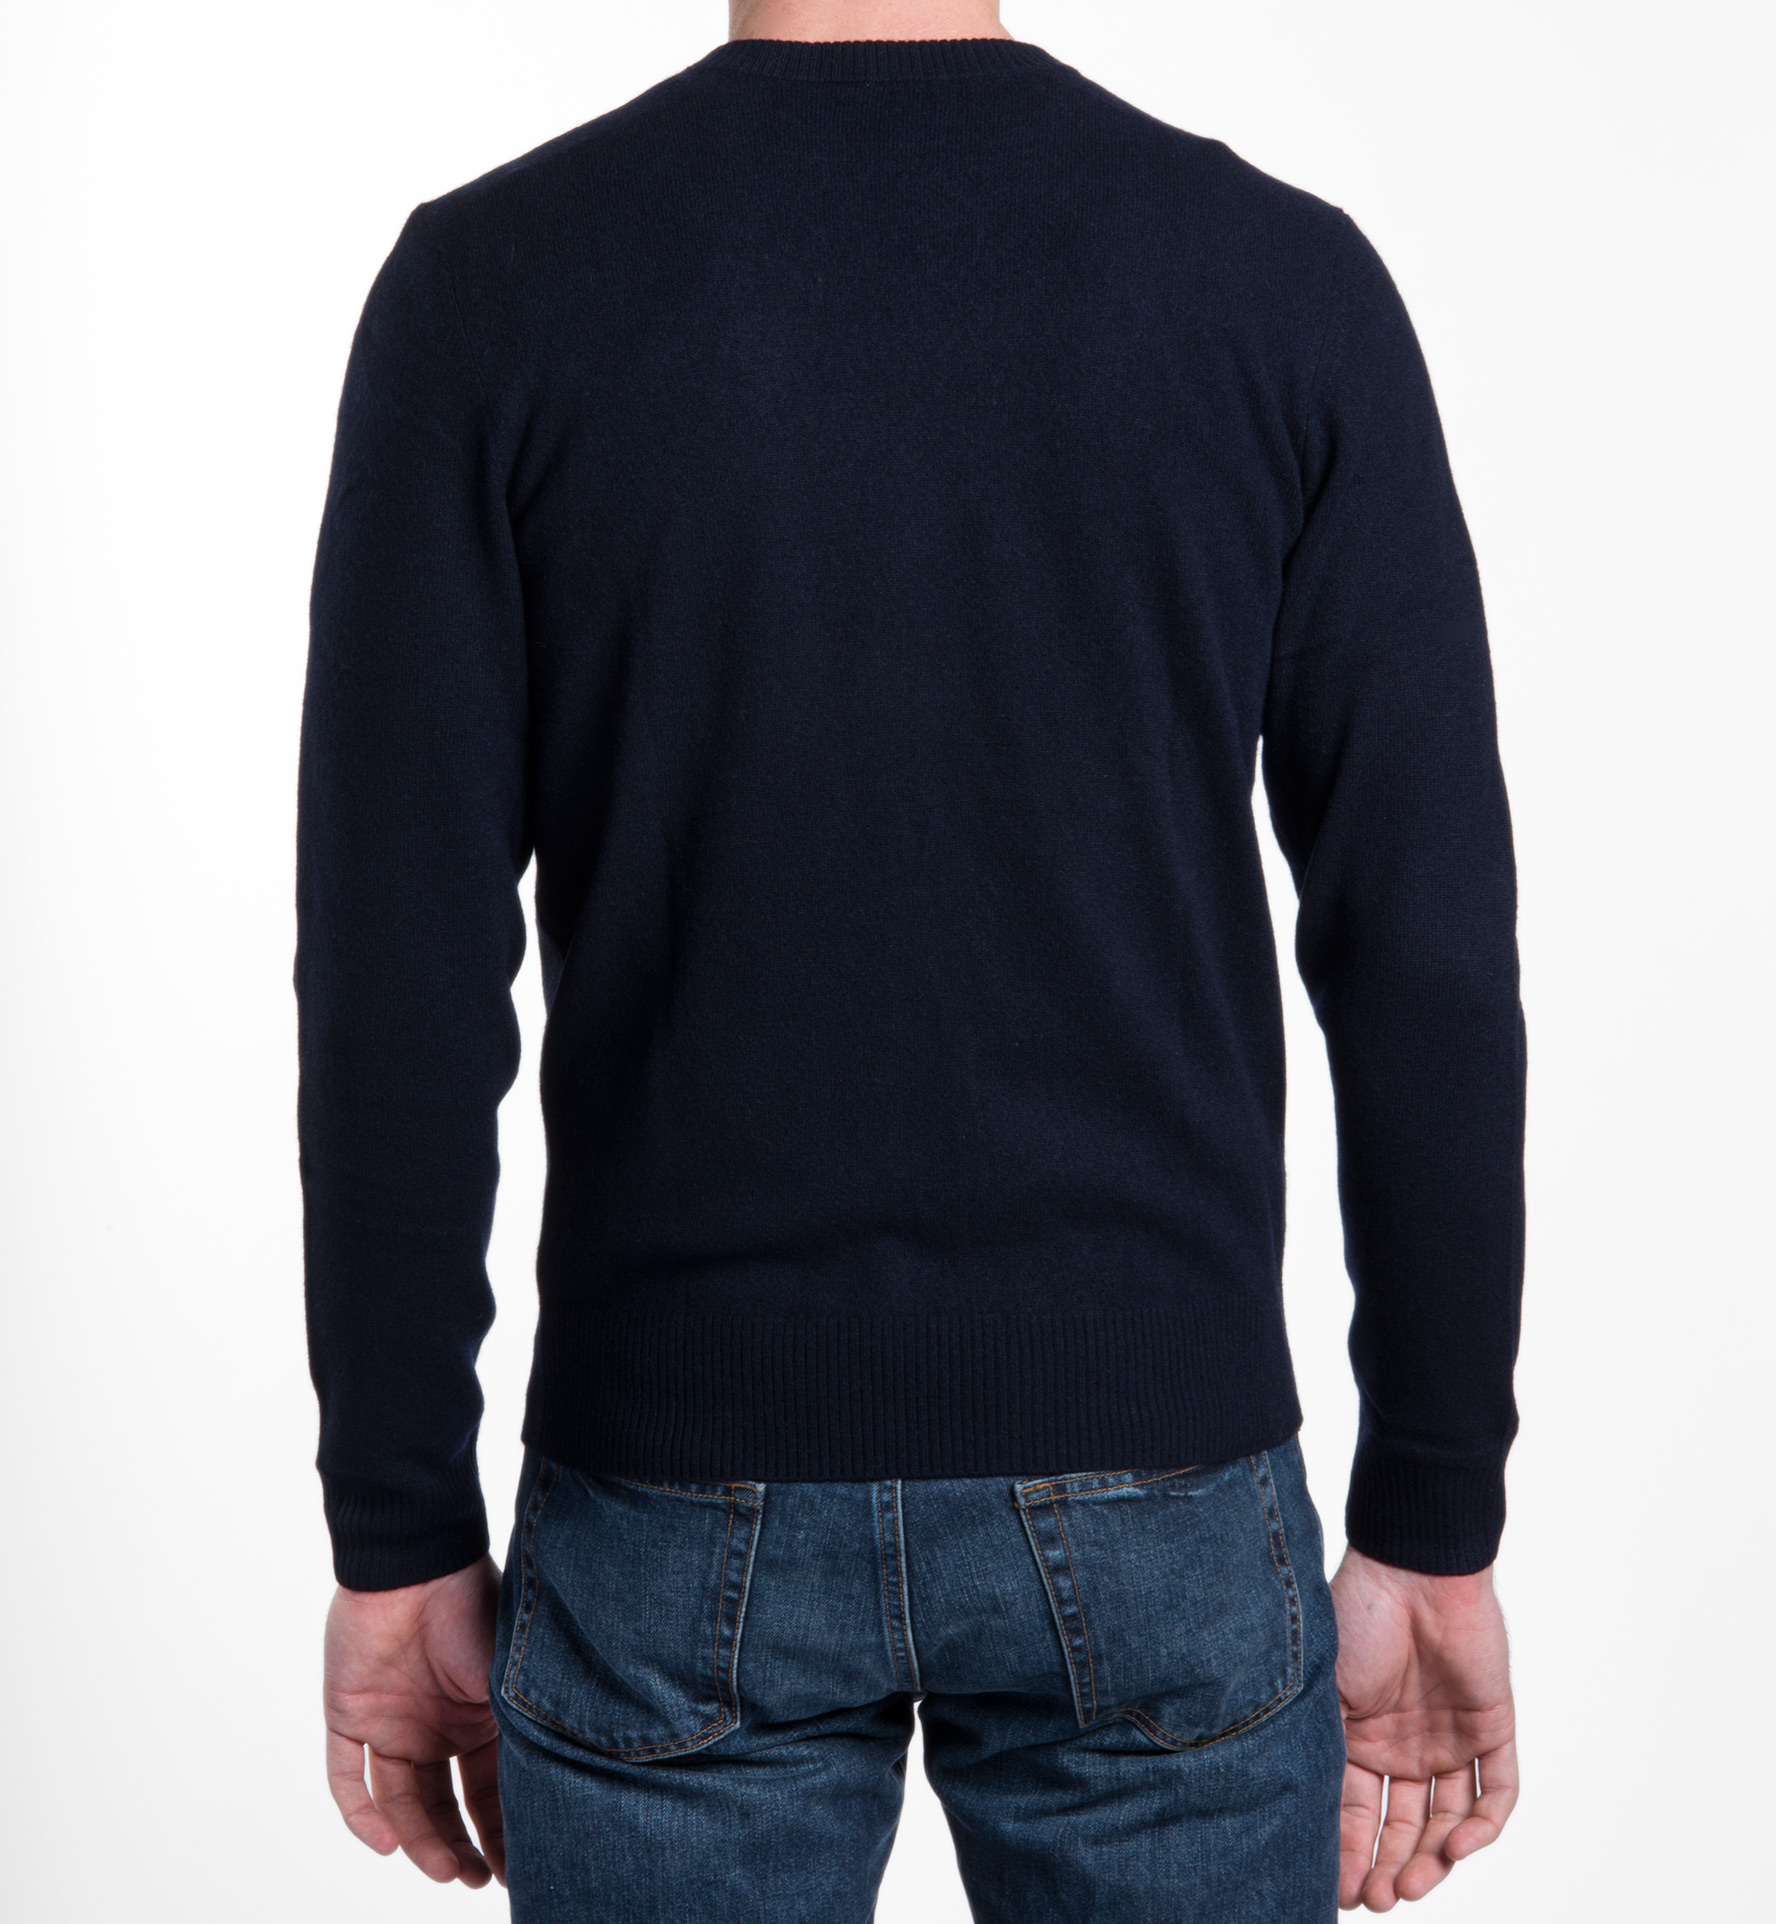 Navy and Red Stripe Cashmere Sweater by Proper Cloth